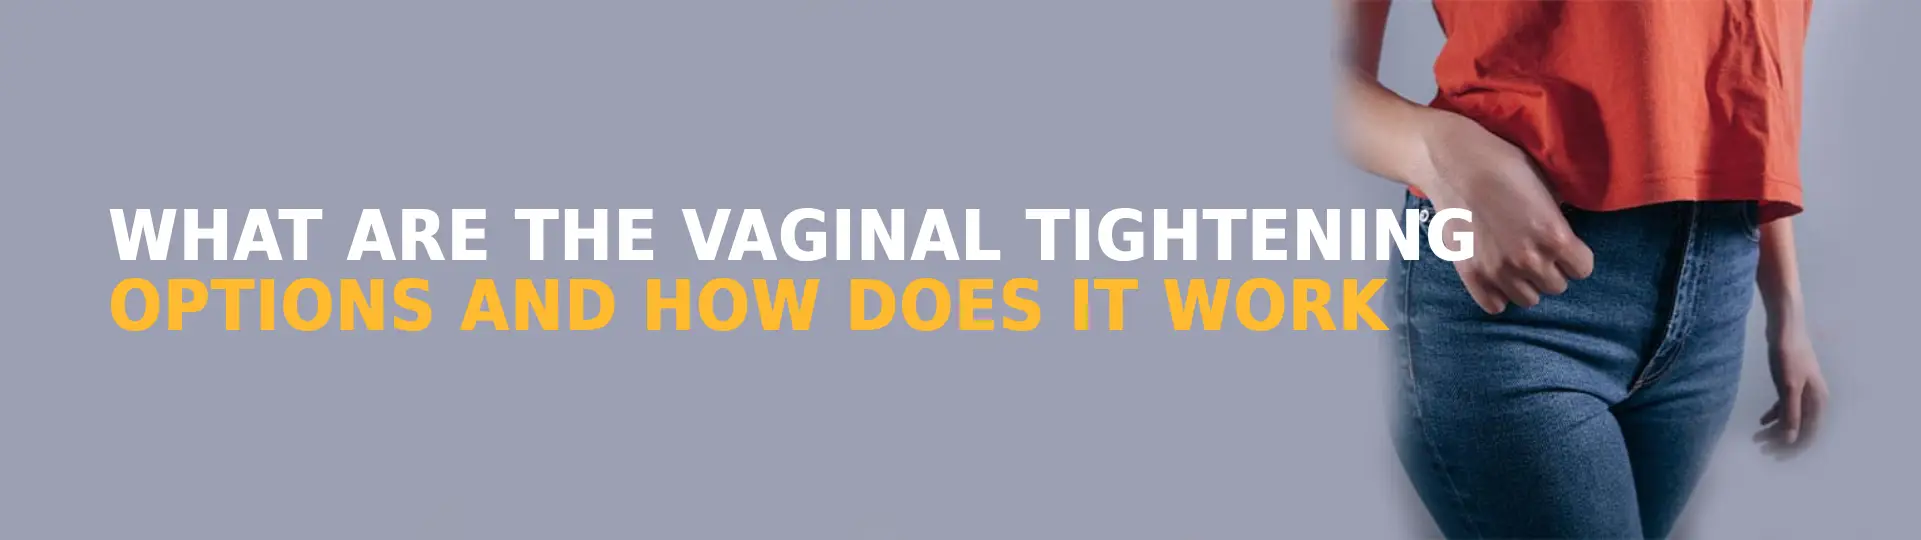 What Are The Vaginal Tightening Options And How Does It Work